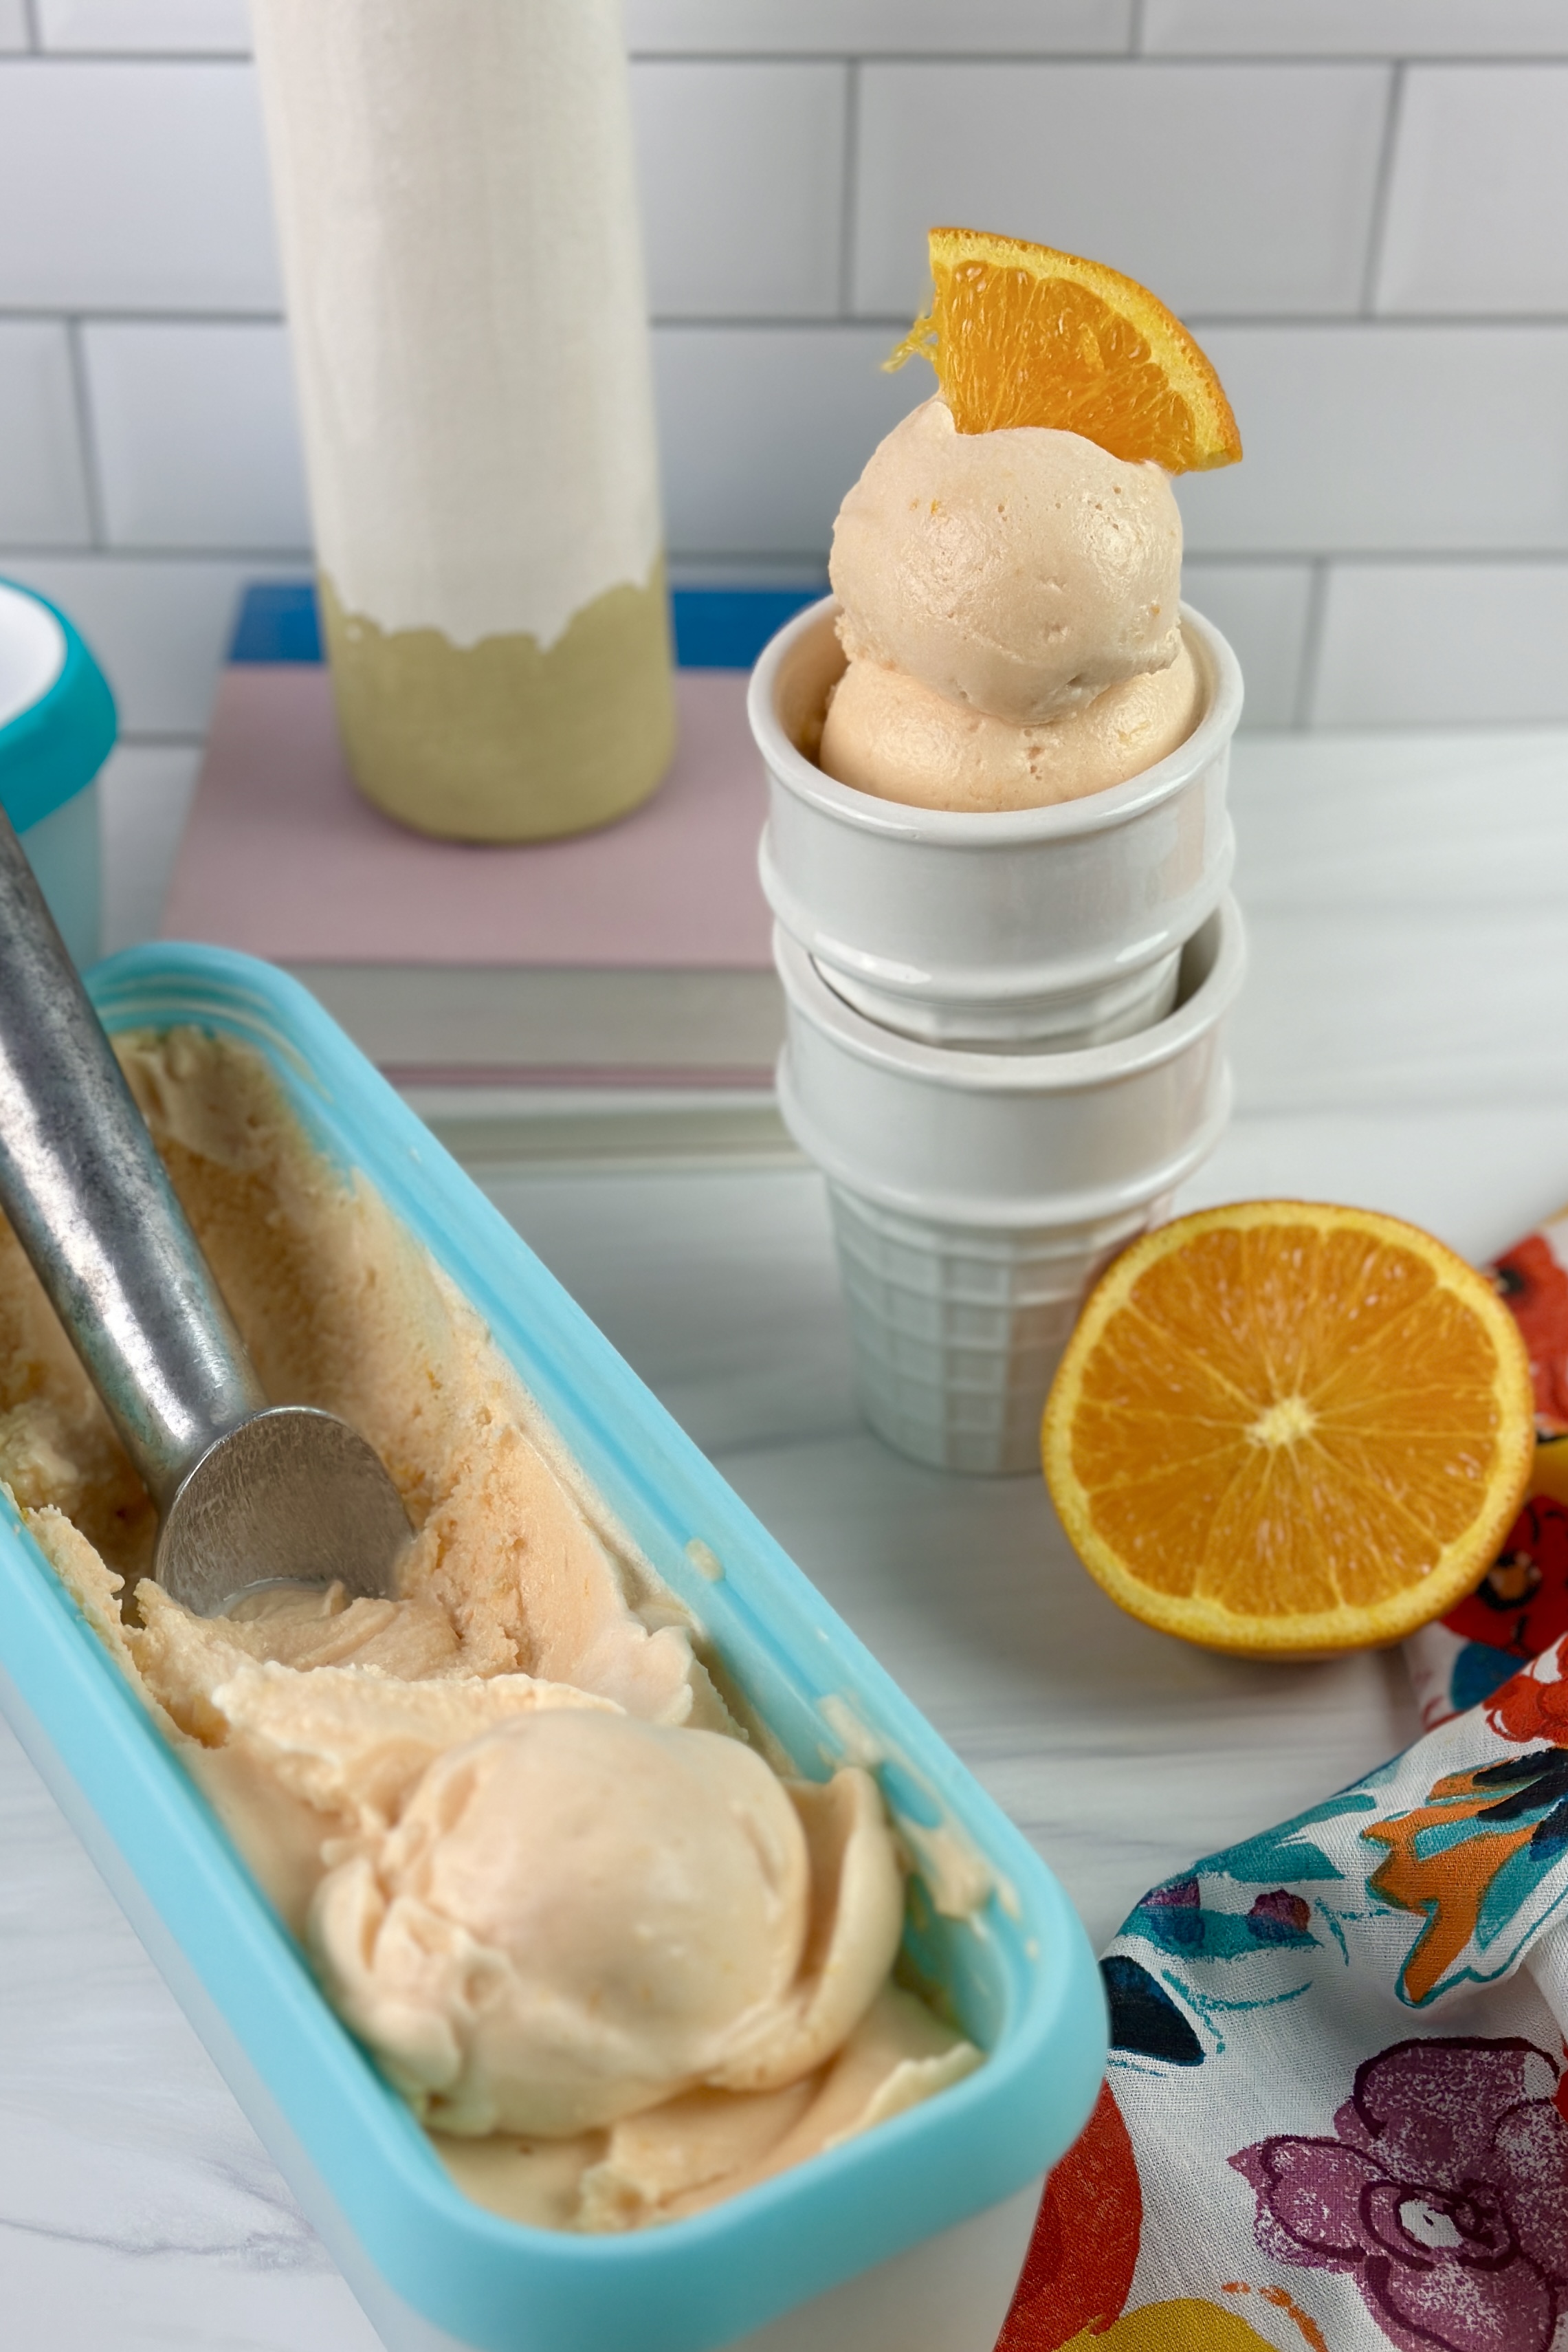 This nostalgic Creamsicle Ice Cream is easy to make and tastes like your childhood favorite combination of orange and vanilla.